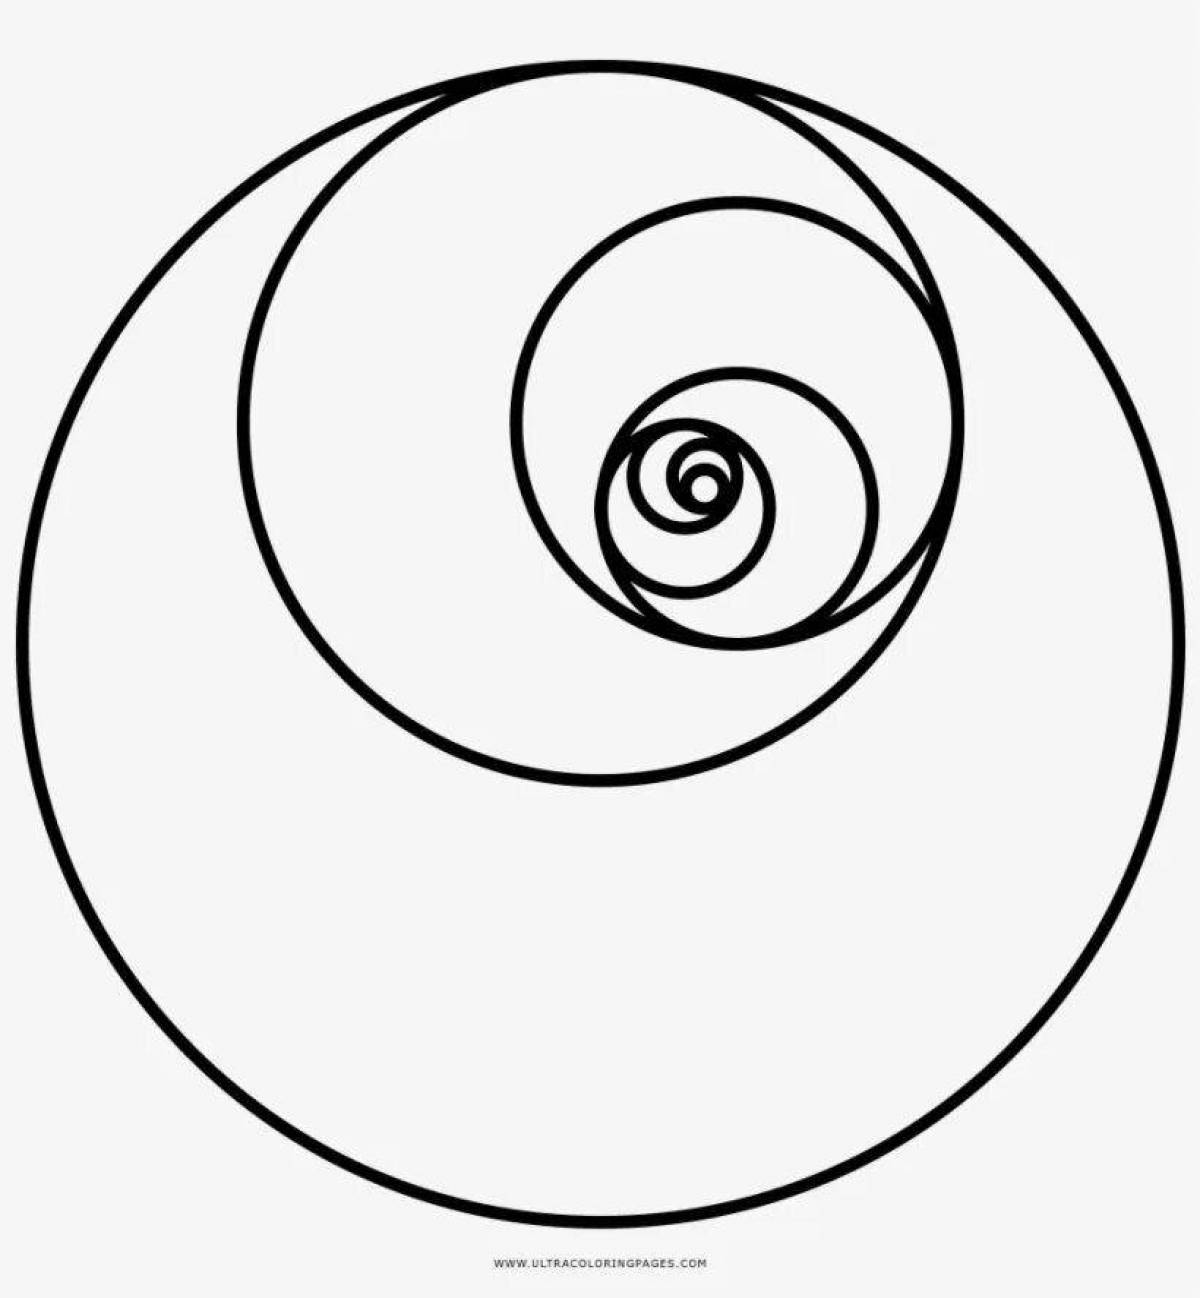 Complex homemade spiral coloring